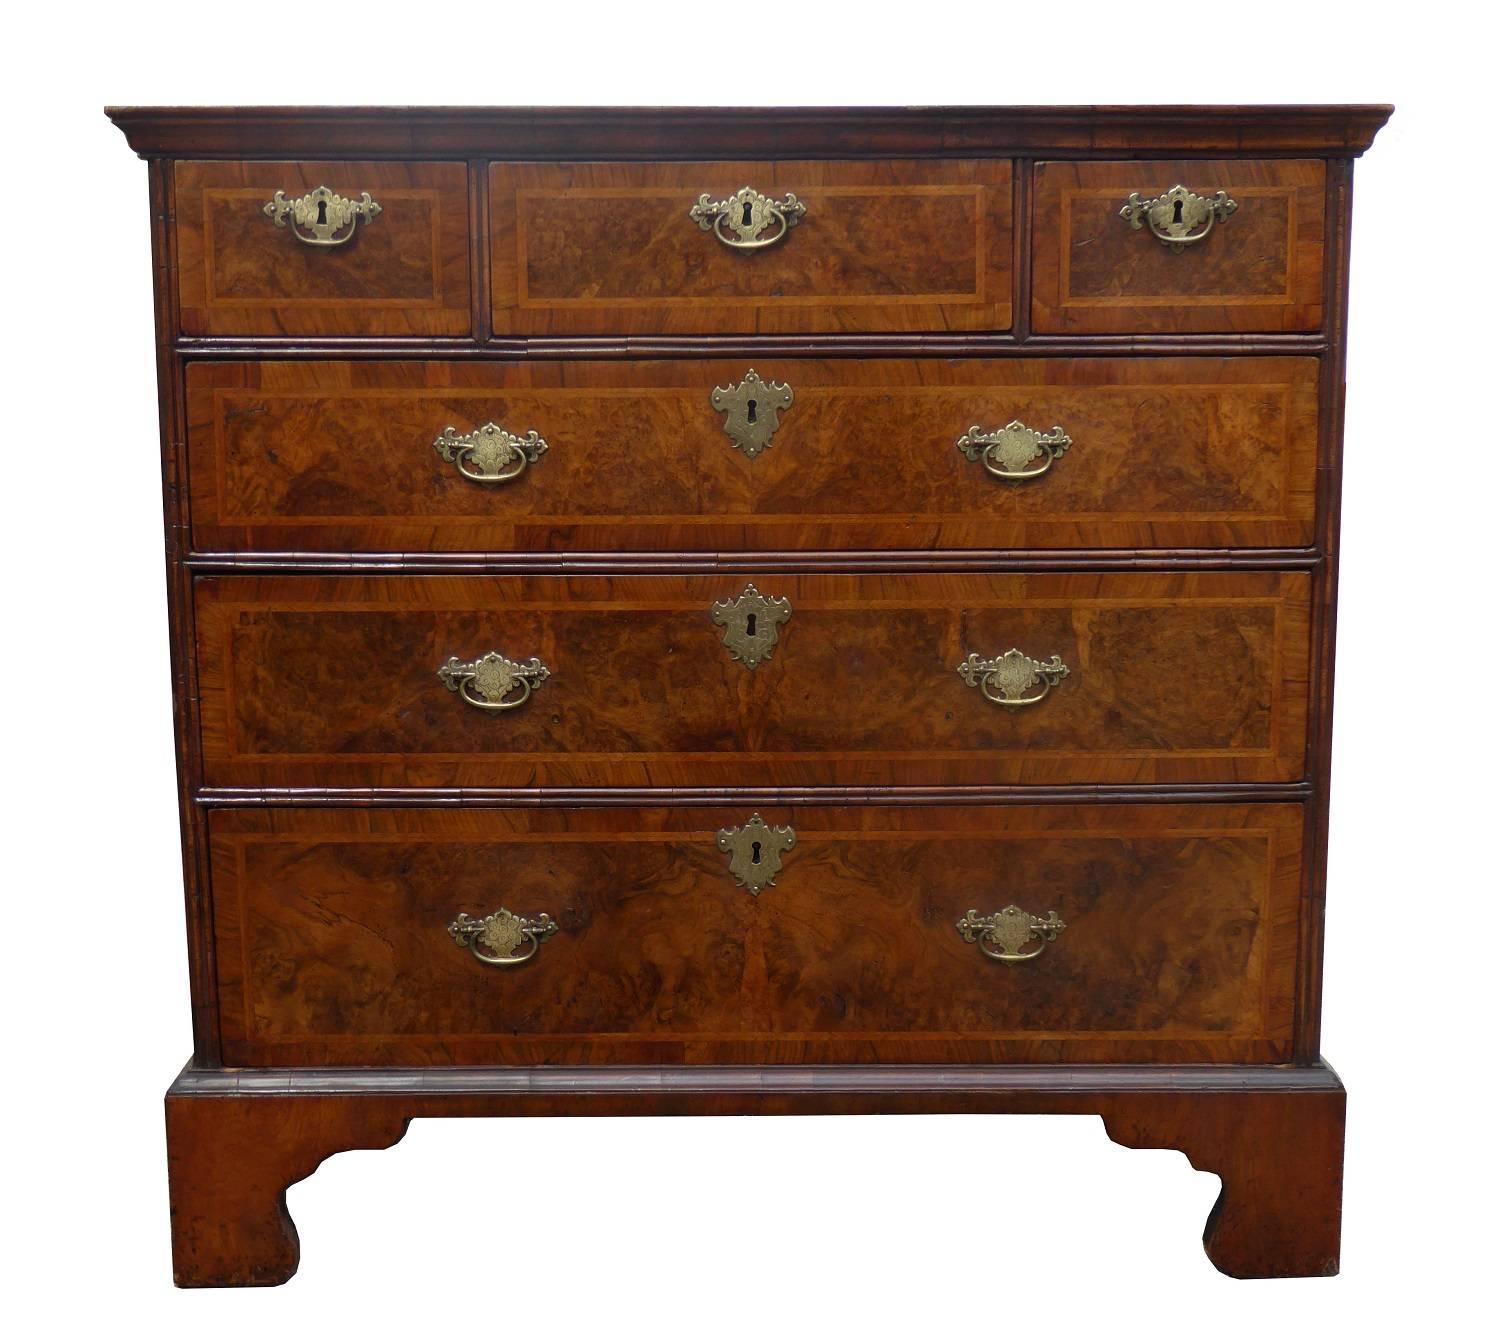 For sale is a good quality Genuine George III burr walnut chest of drawers. The top of the chest has three small drawers above with three further drawers below, each with brass handles. The chest stands on nice bracket feet and is in very good